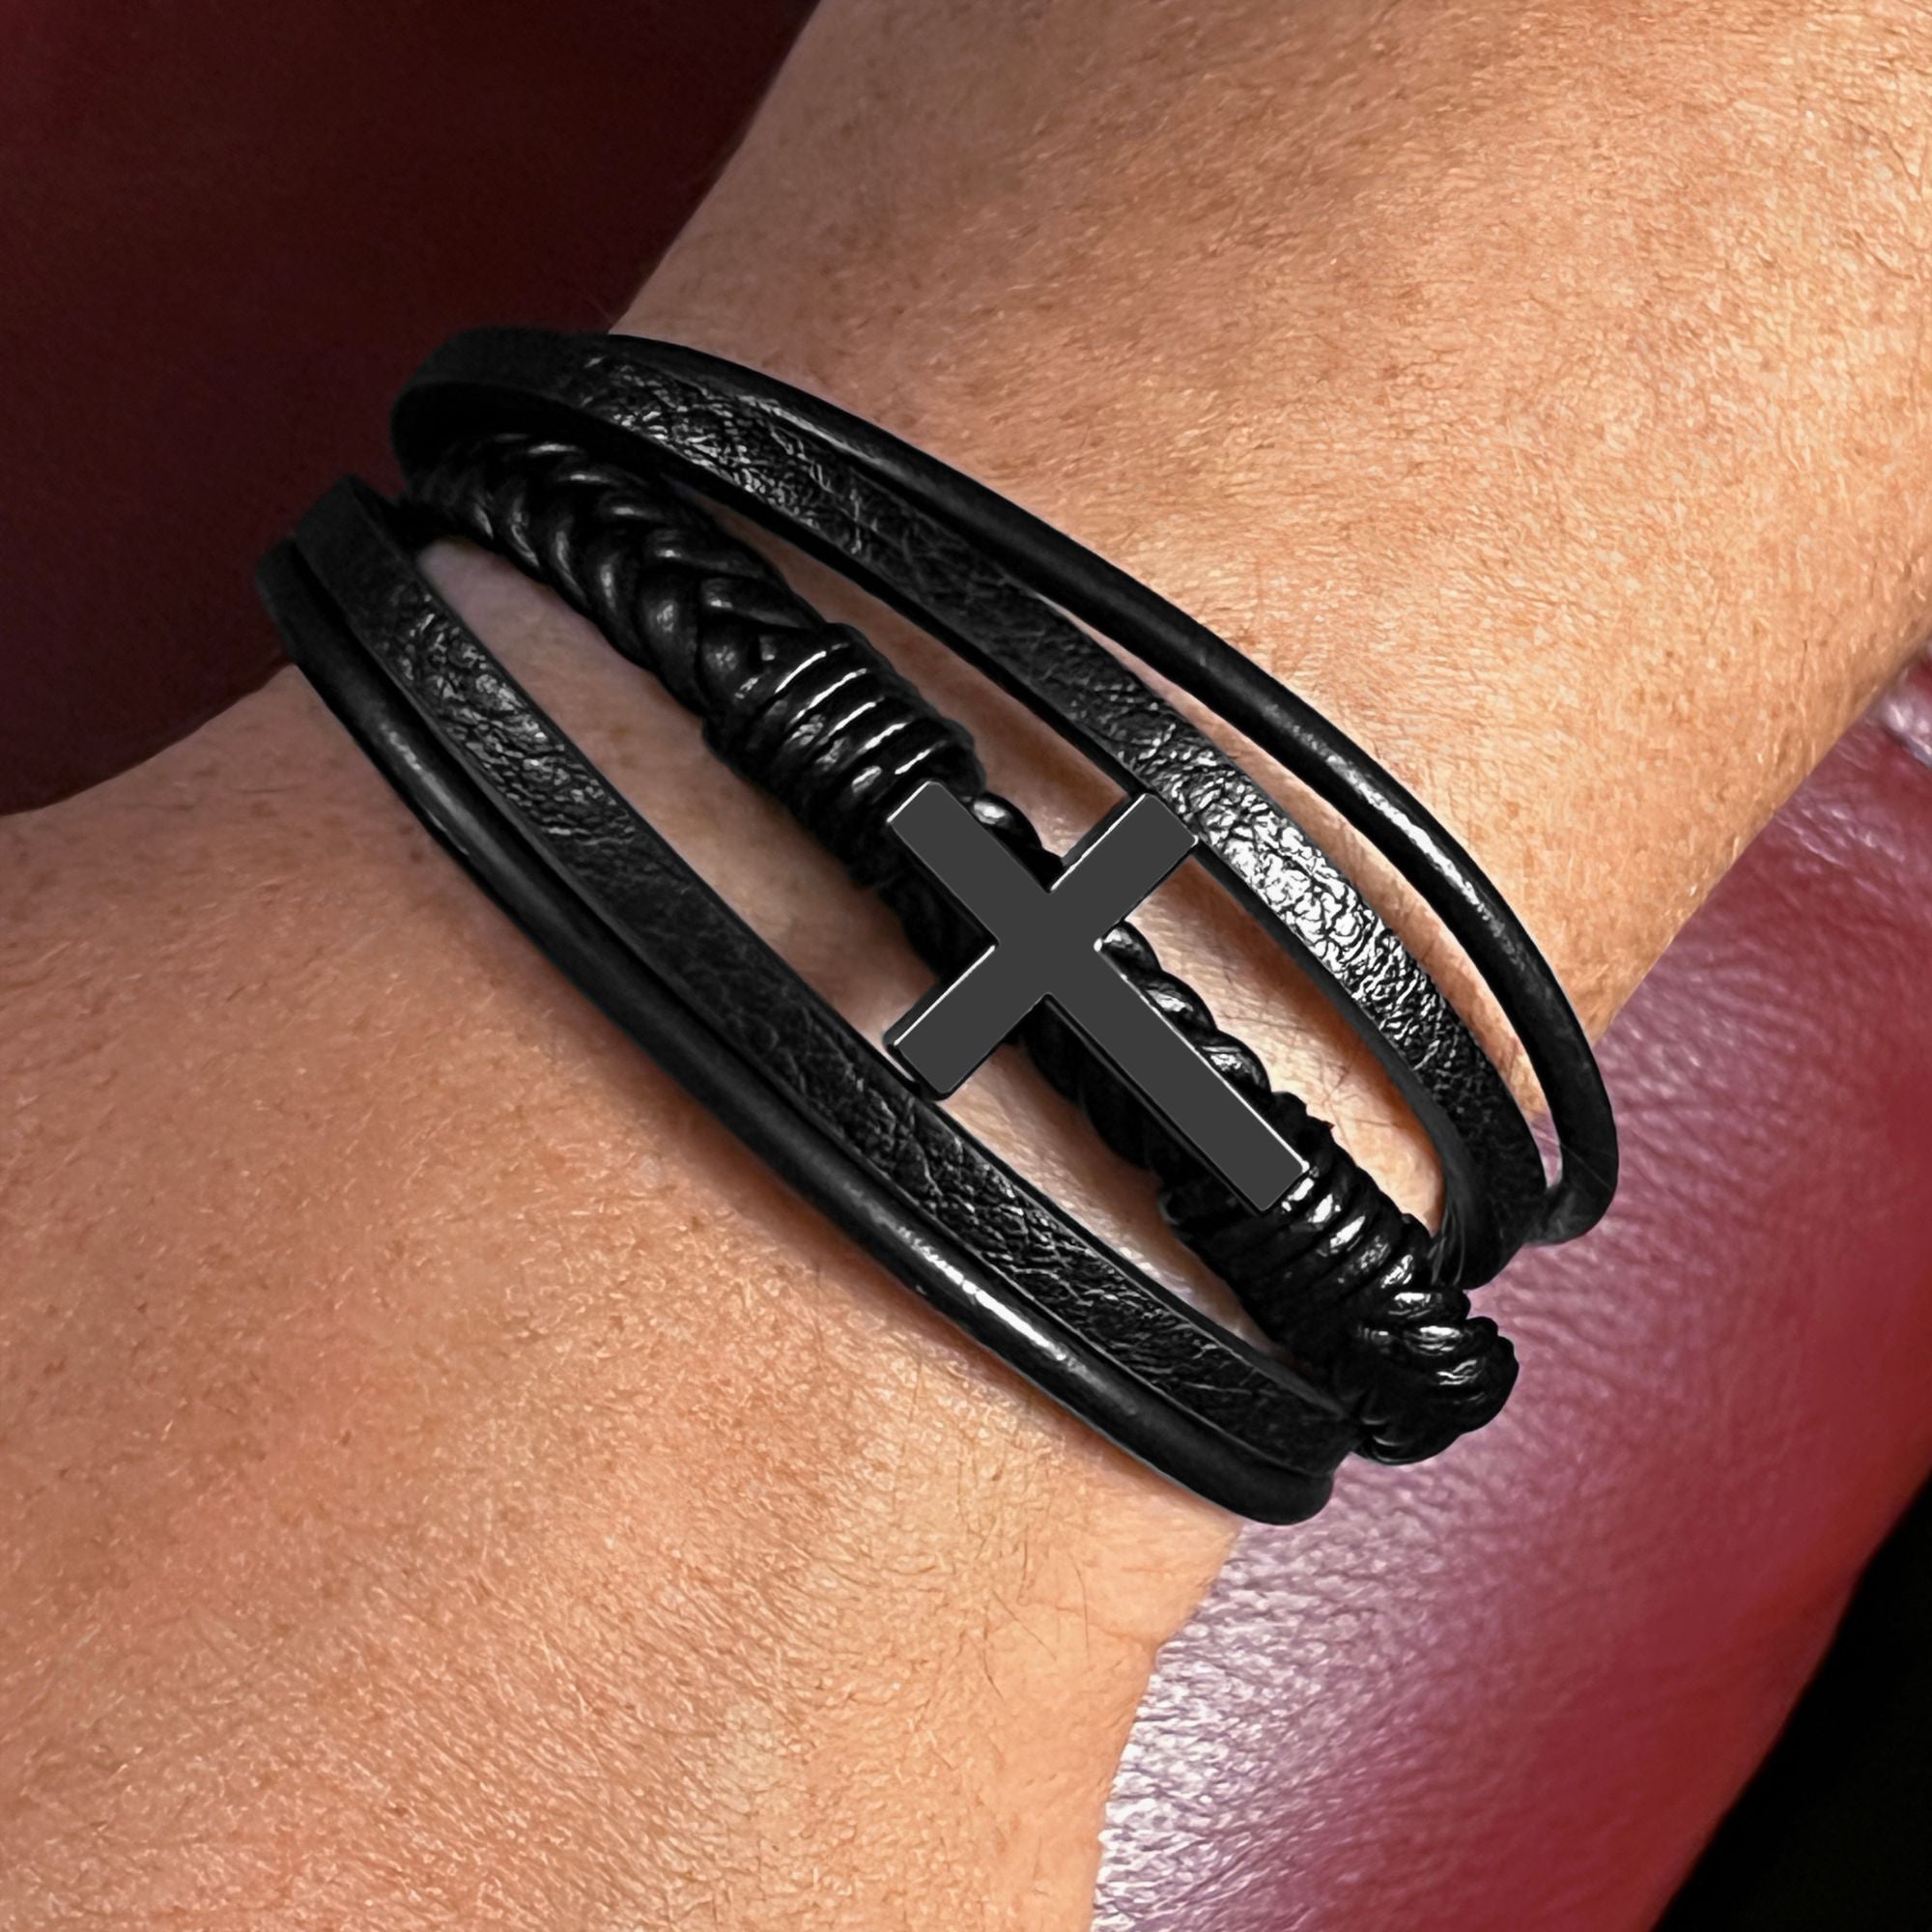 Where The Spirit of the Lord - Men's Cross and Black Braided Rope Bracelet Jesus Passion Apparel